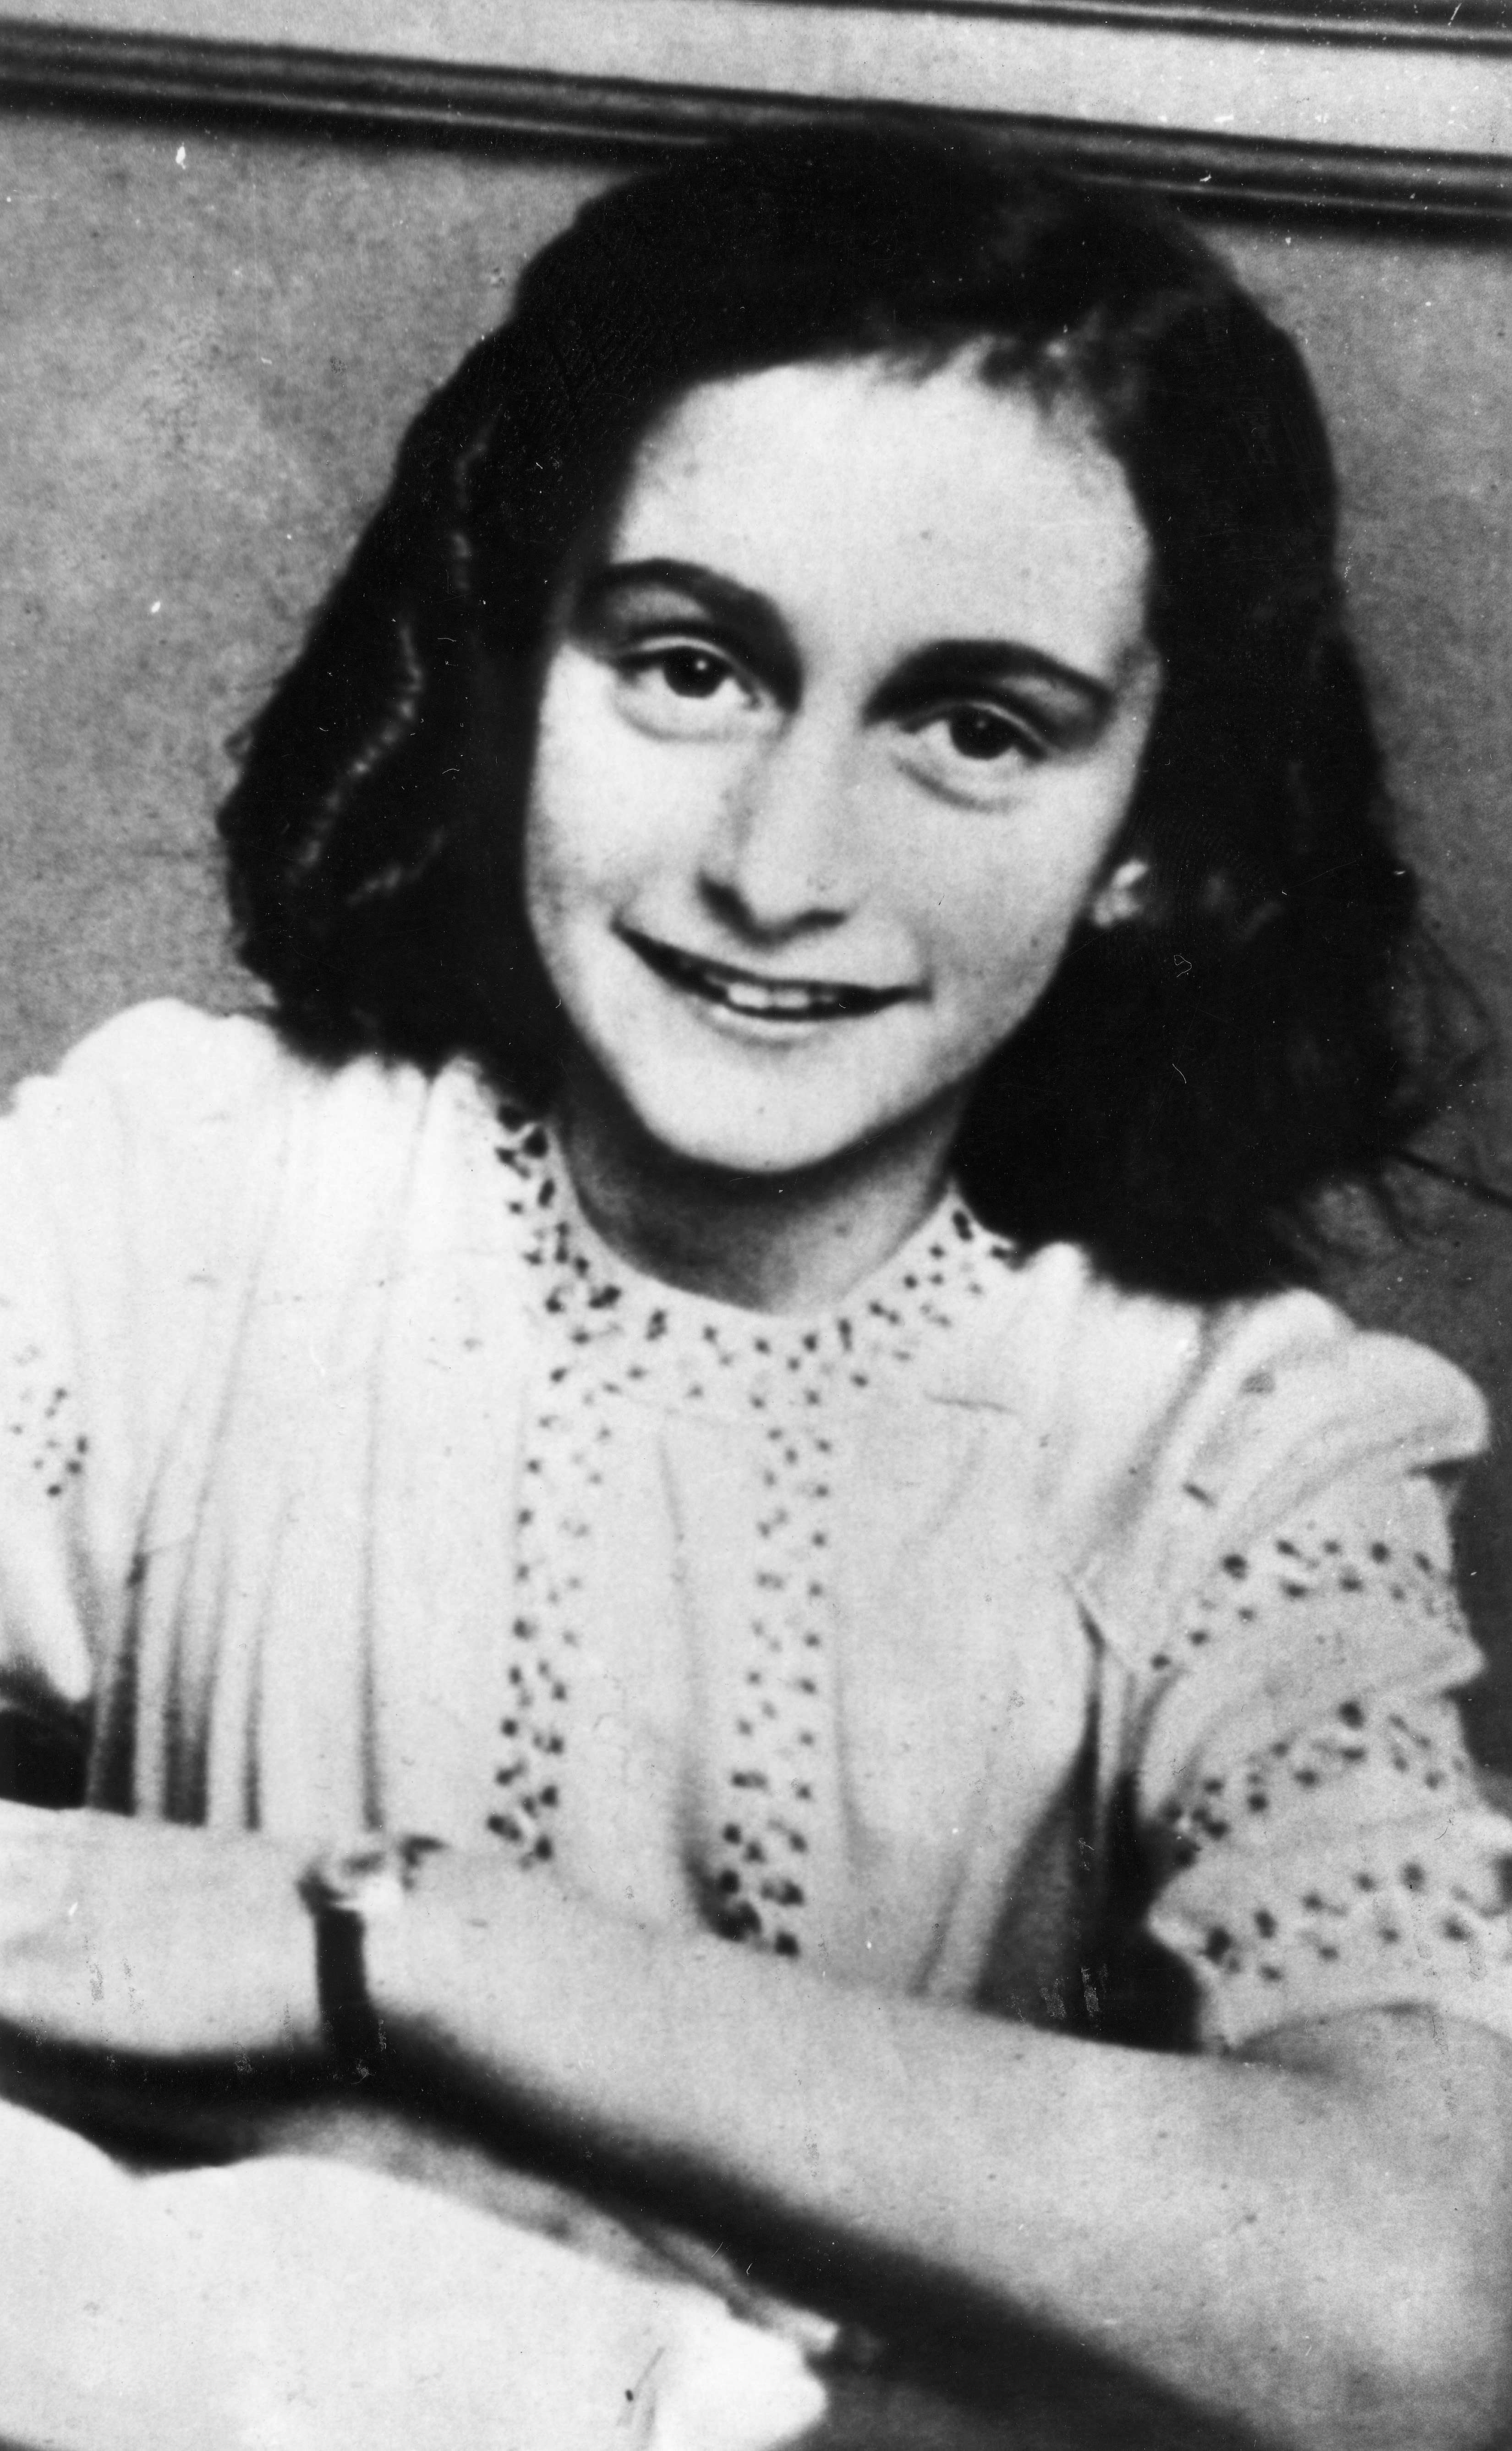 Anne Frank (1929-1945). (Heritage Images/Getty Images)